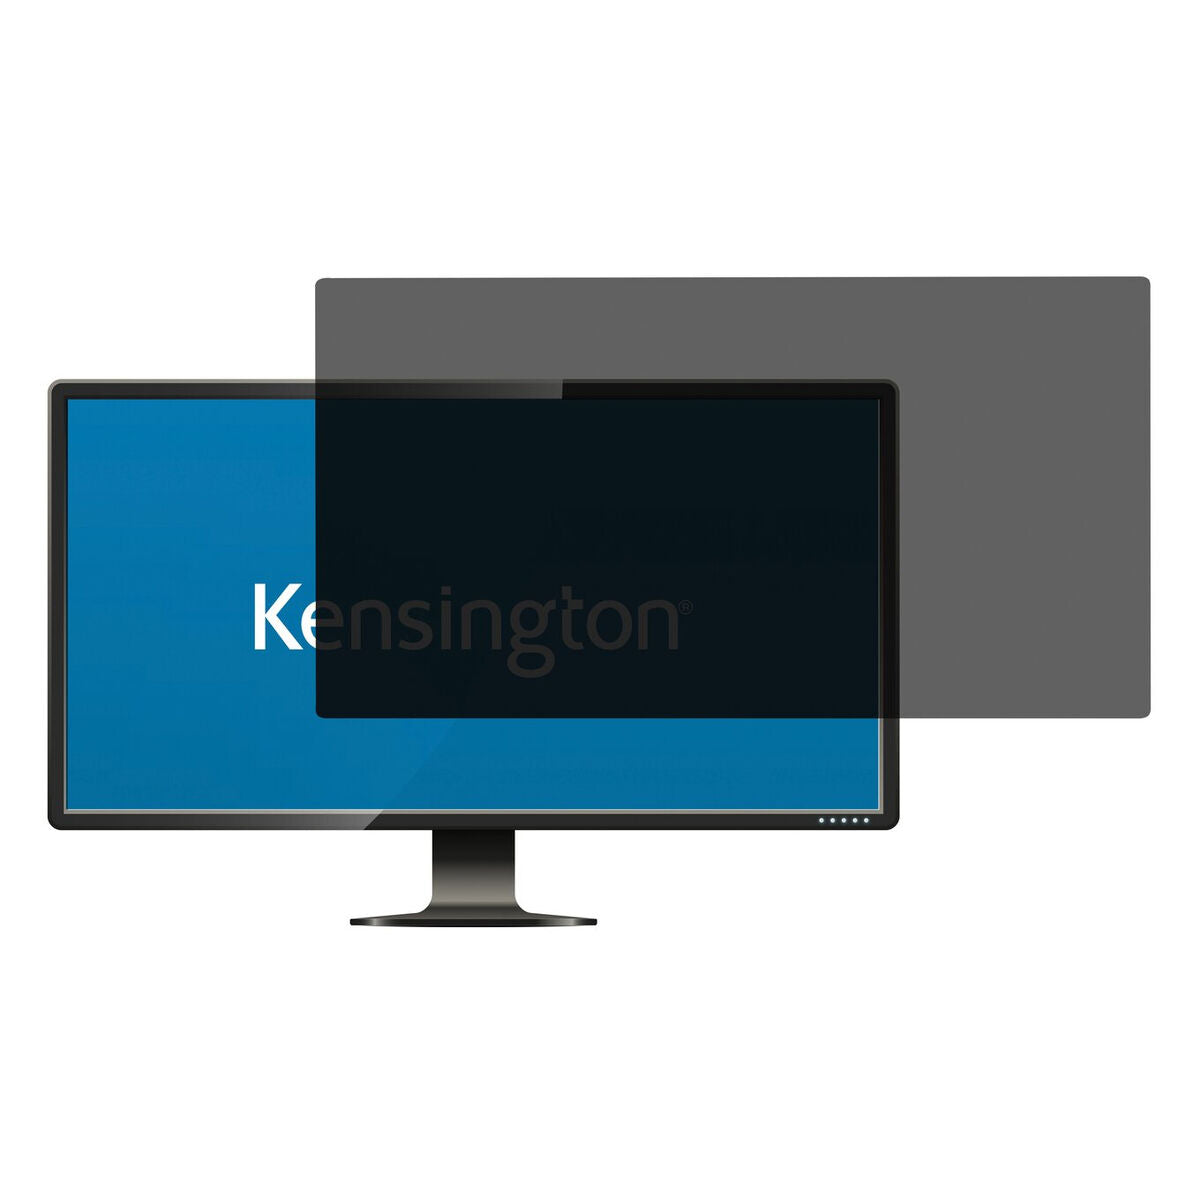 Privacy Filter for Monitor Kensington 626486 23,8", Kensington, Computing, Accessories, privacy-filter-for-monitor-kensington-626486-23-8, Brand_Kensington, category-reference-2609, category-reference-2642, category-reference-2644, category-reference-t-19685, category-reference-t-19908, category-reference-t-21342, computers / peripherals, Condition_NEW, office, Price_100 - 200, Teleworking, RiotNook